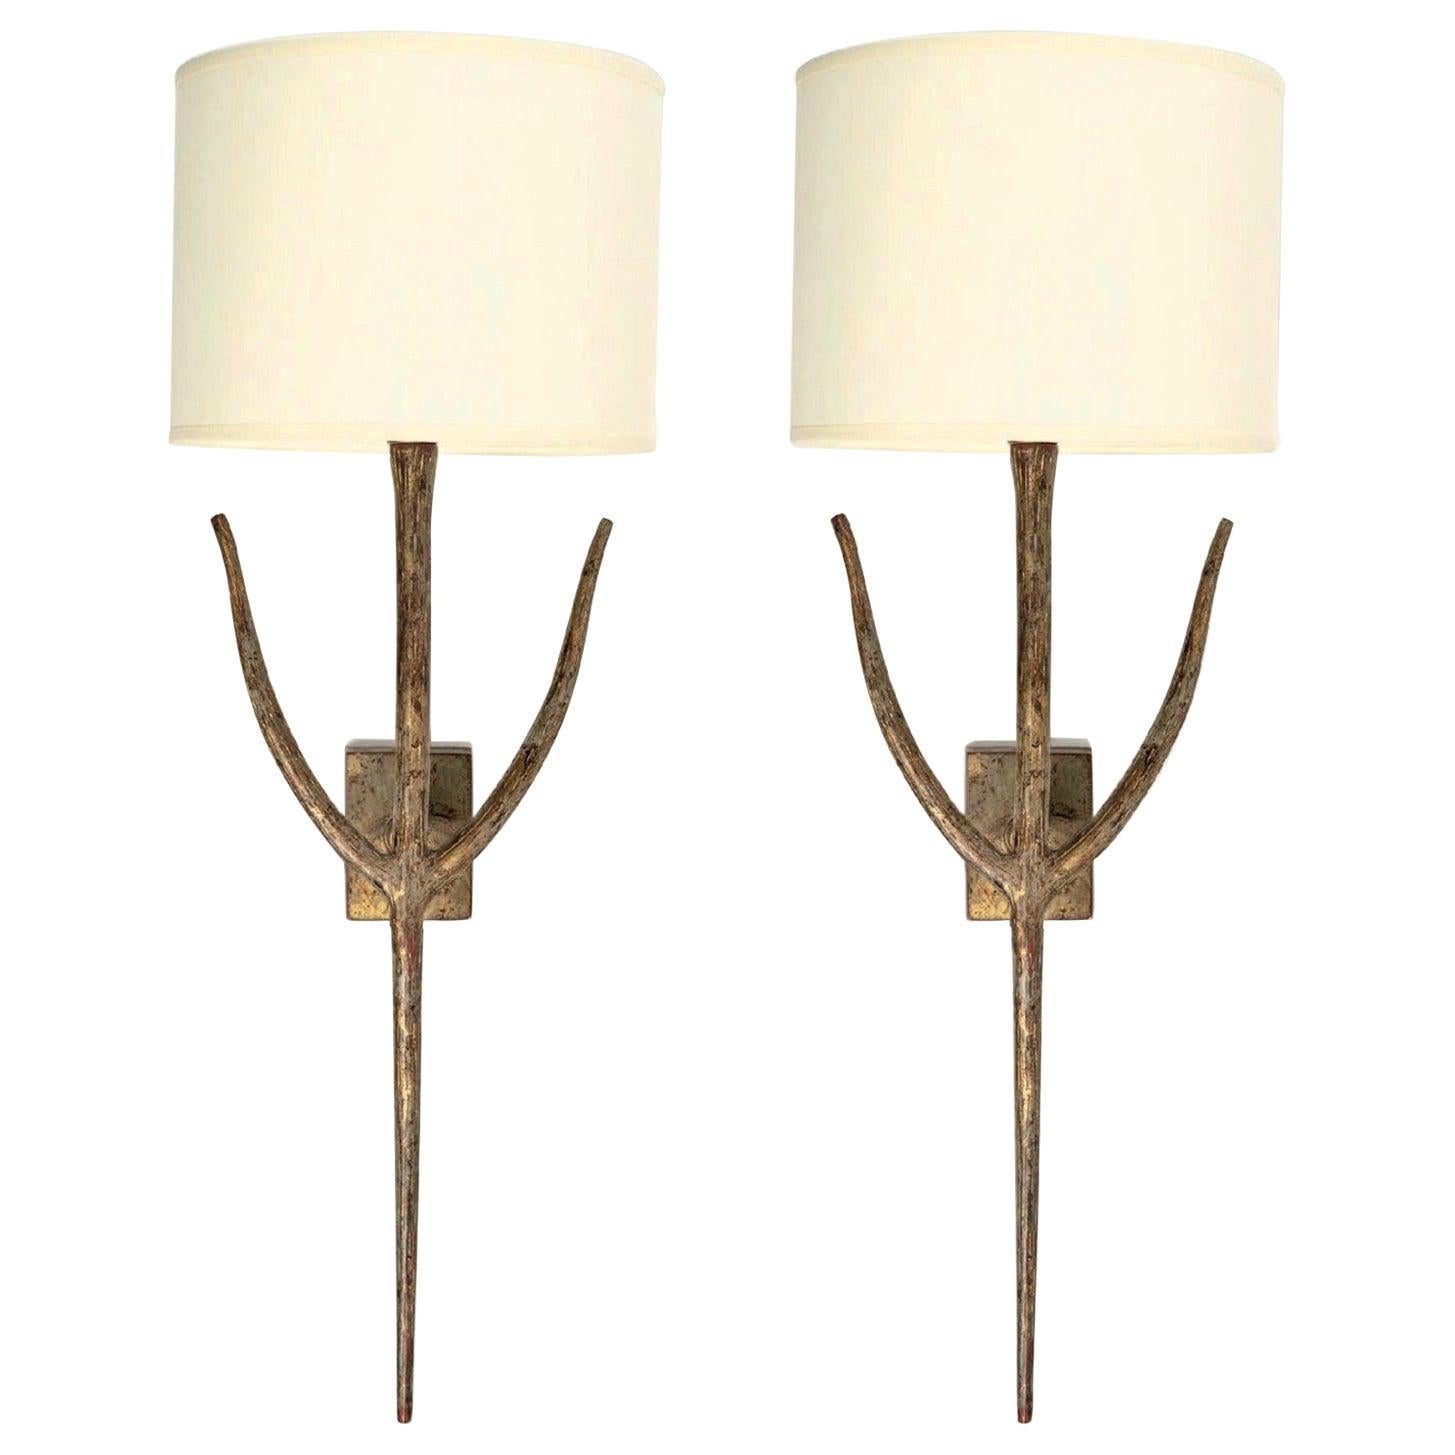 Large Pair of Bronze Wall Lights by Franco Lapini for Porta Romana, 1980